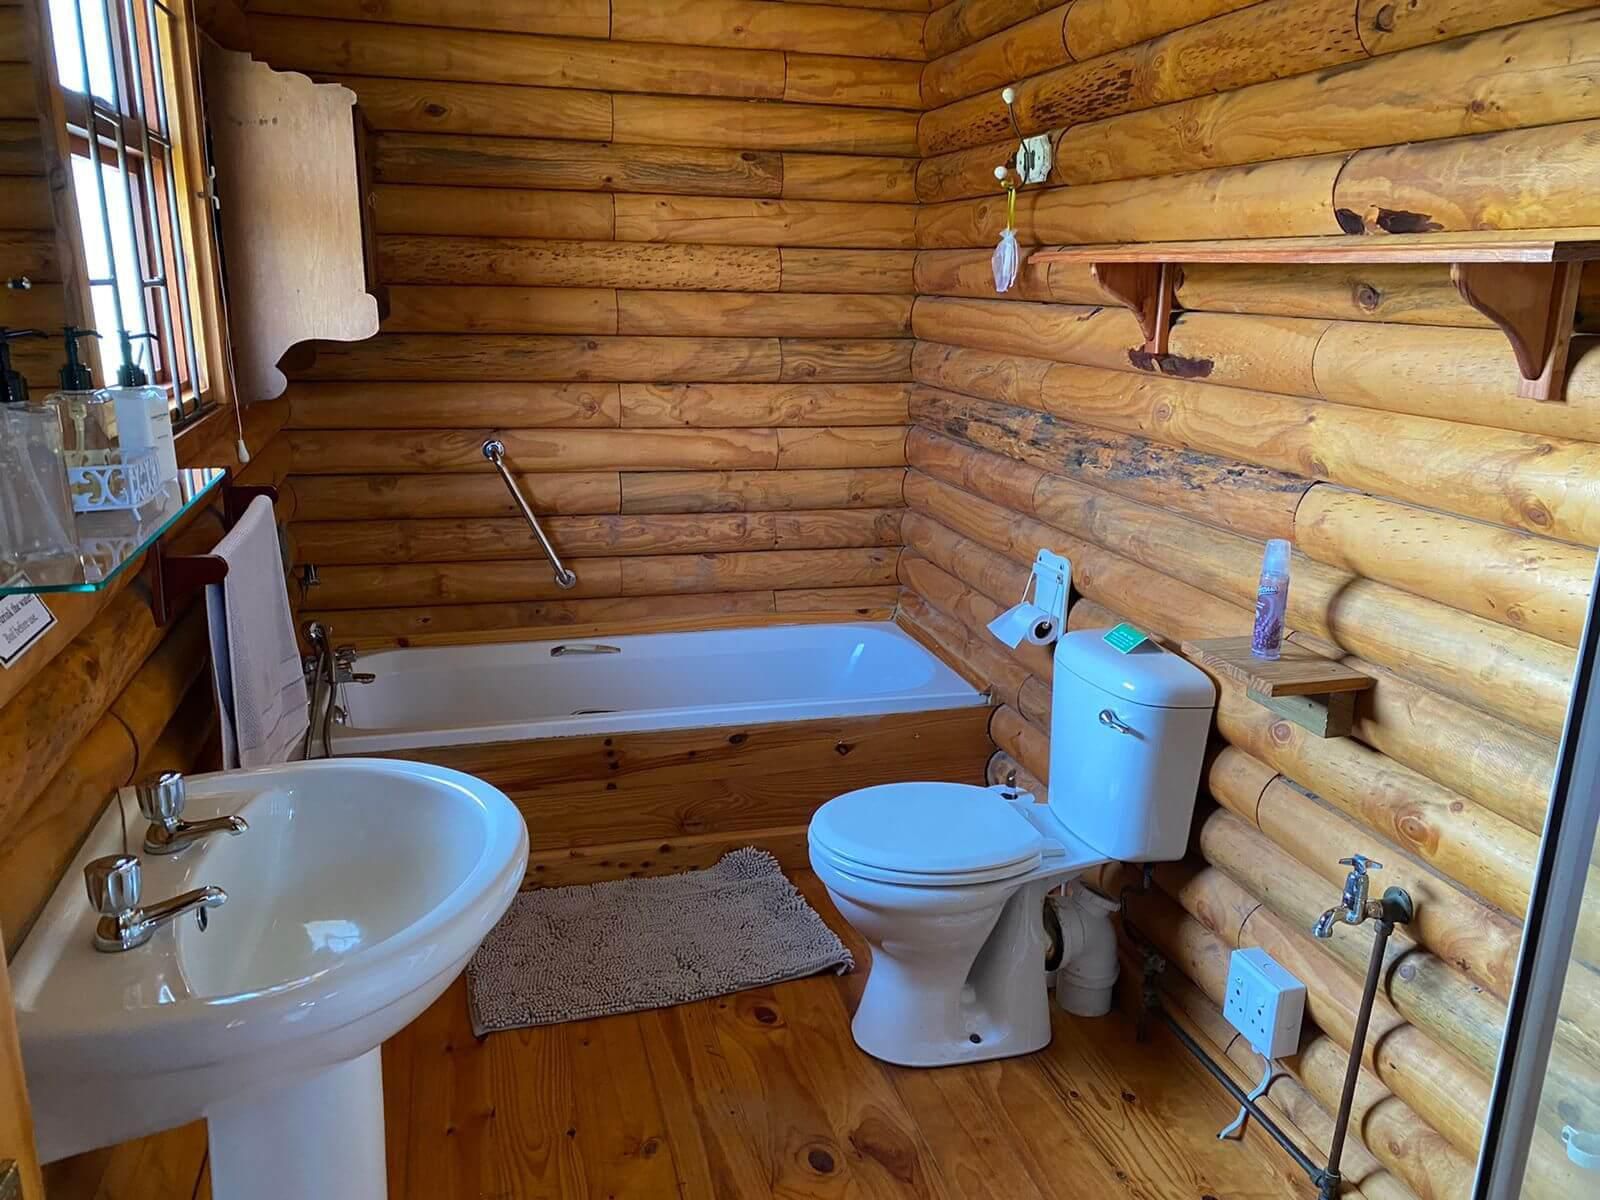 Heilfontein Country Estate Teslaarsdal Western Cape South Africa Cabin, Building, Architecture, Bathroom